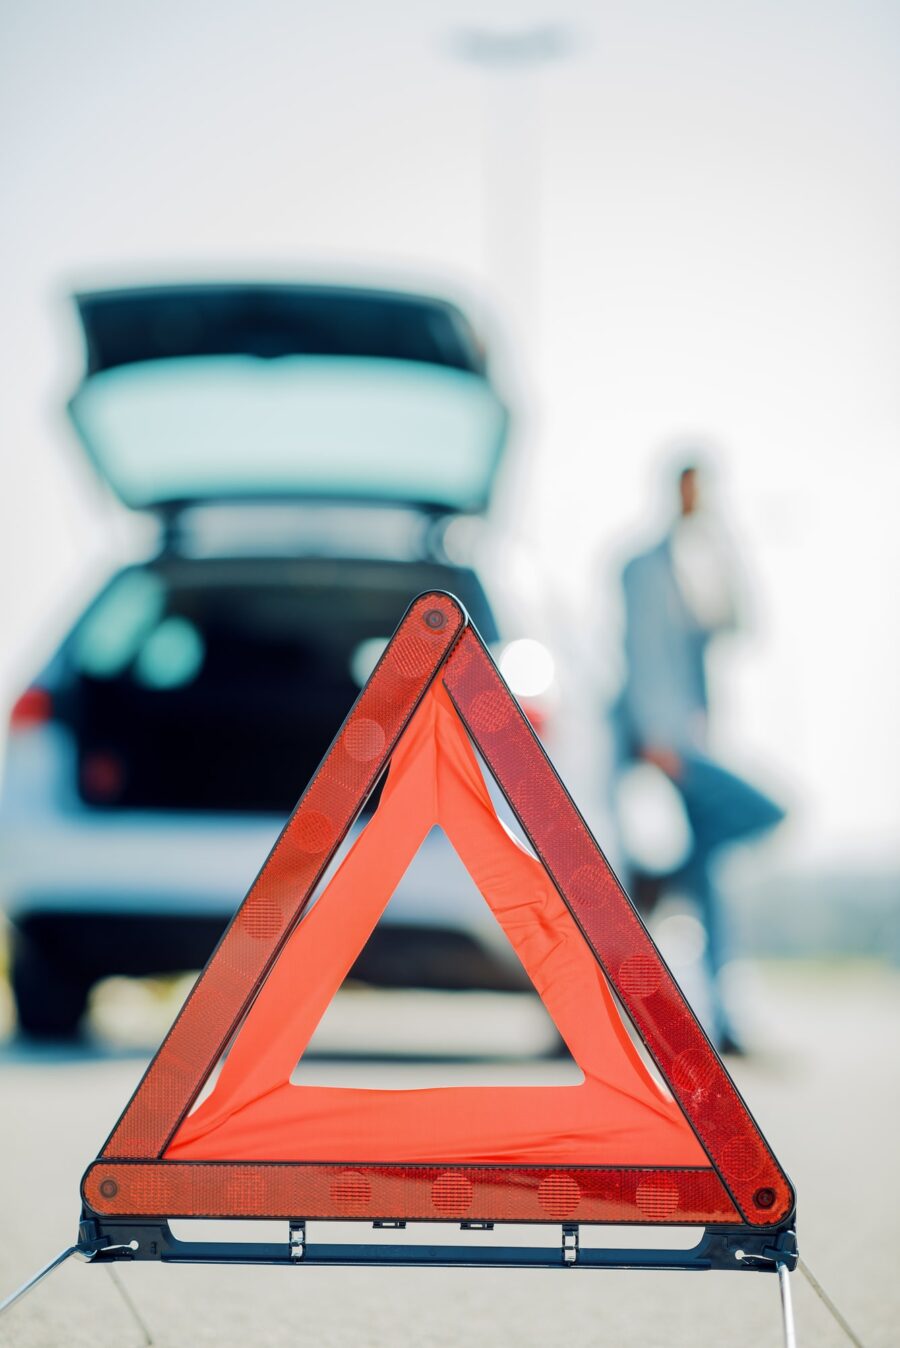 Car Insurance Advice For Young Drivers